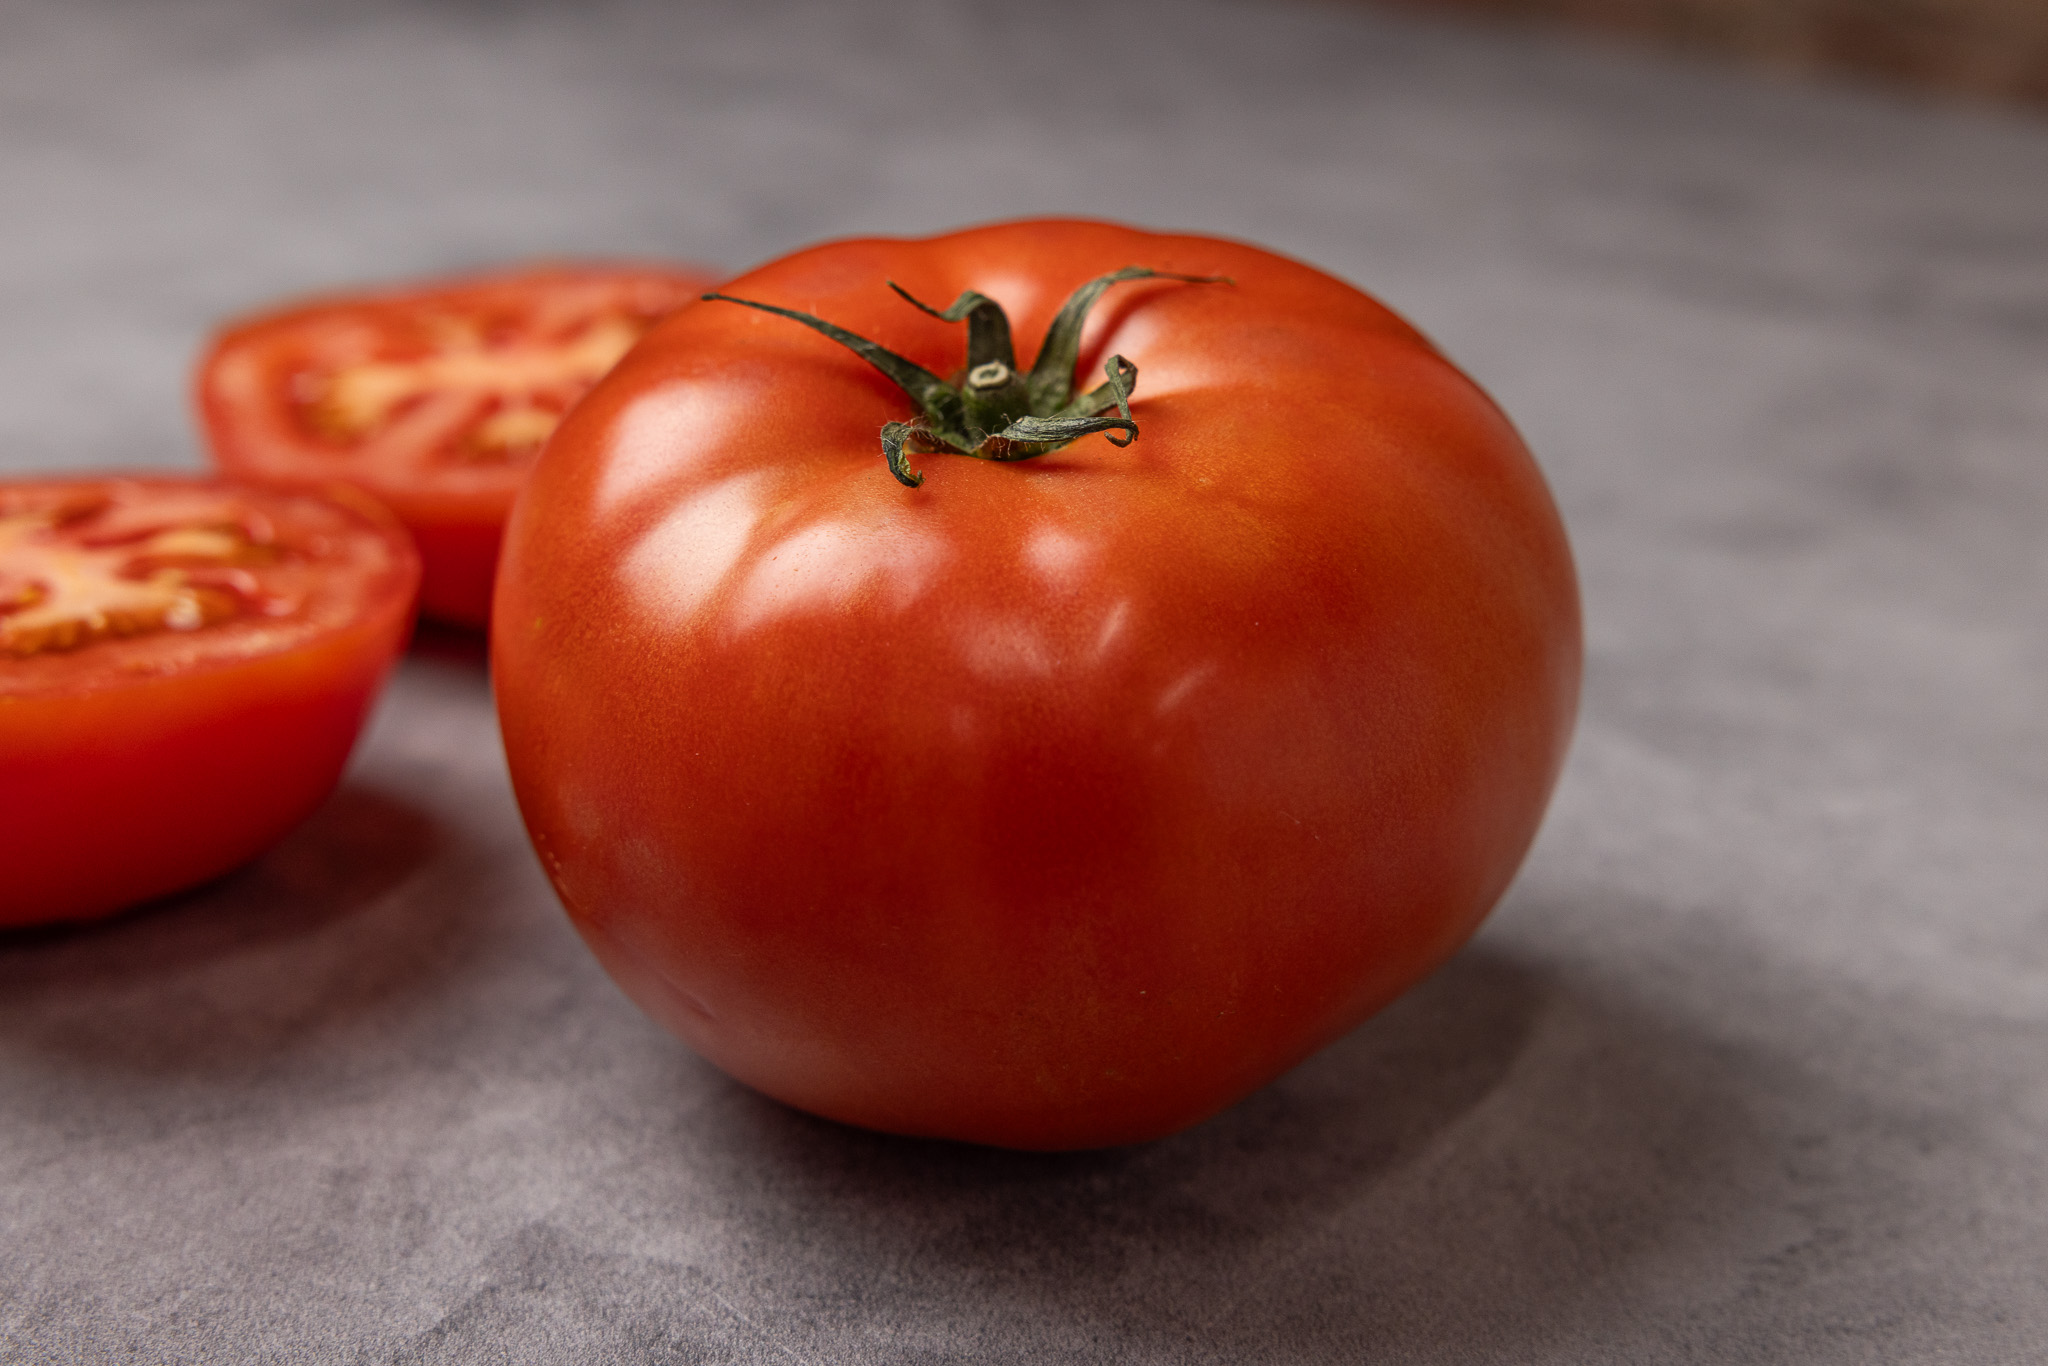 10-types-of-tomatoes-03c00c5d4fabb4fc0c651883